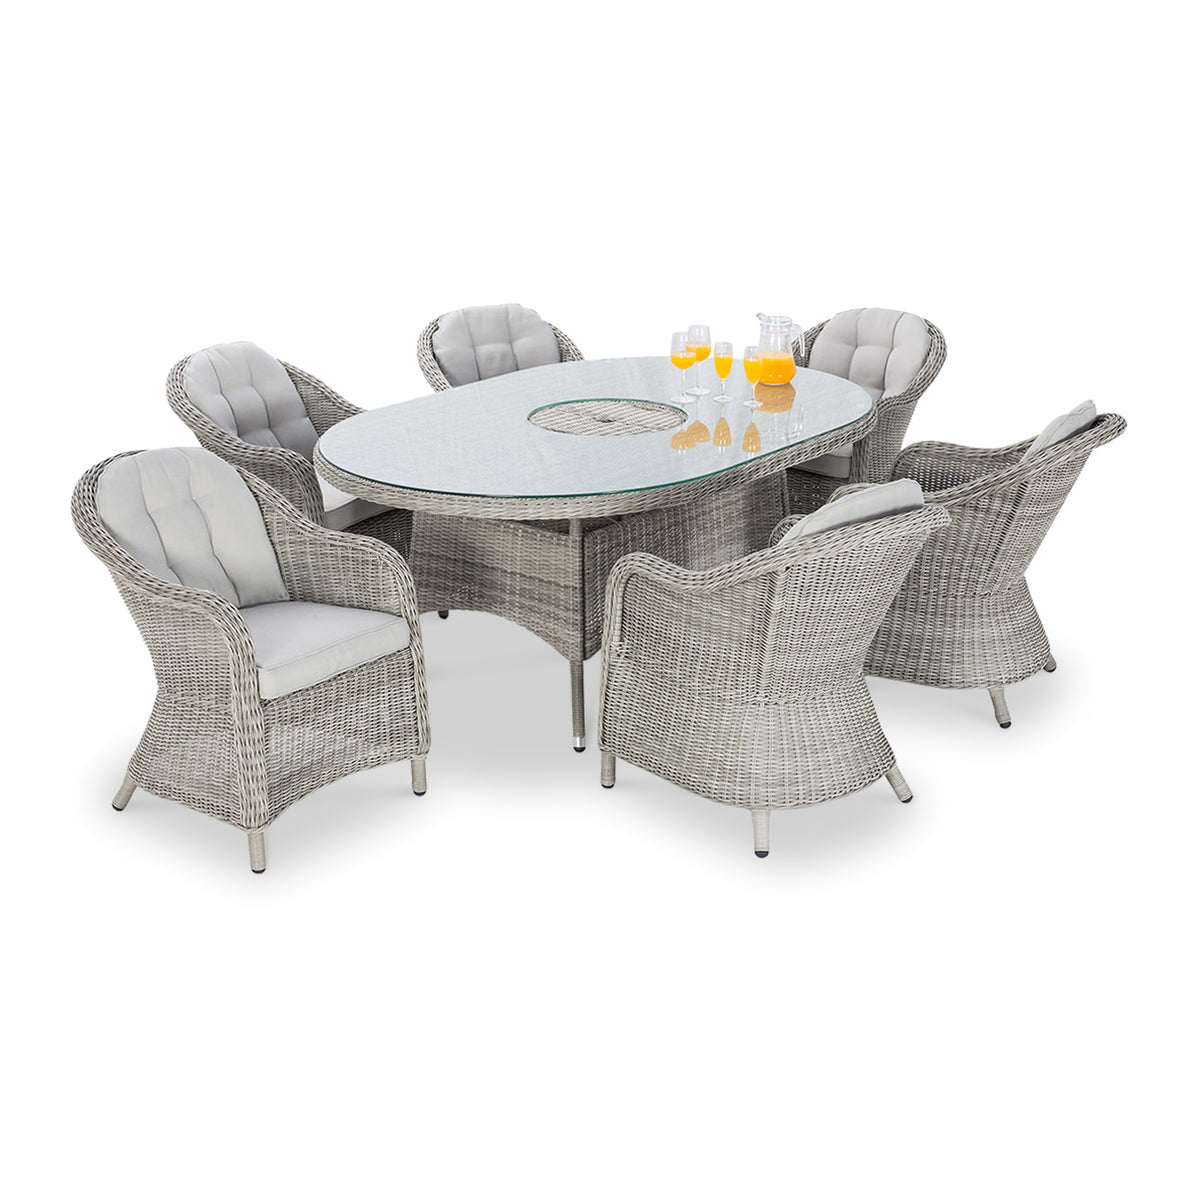 Maze Oxford 6 Seat Oval Rattan Dining Set with Lazy Susan